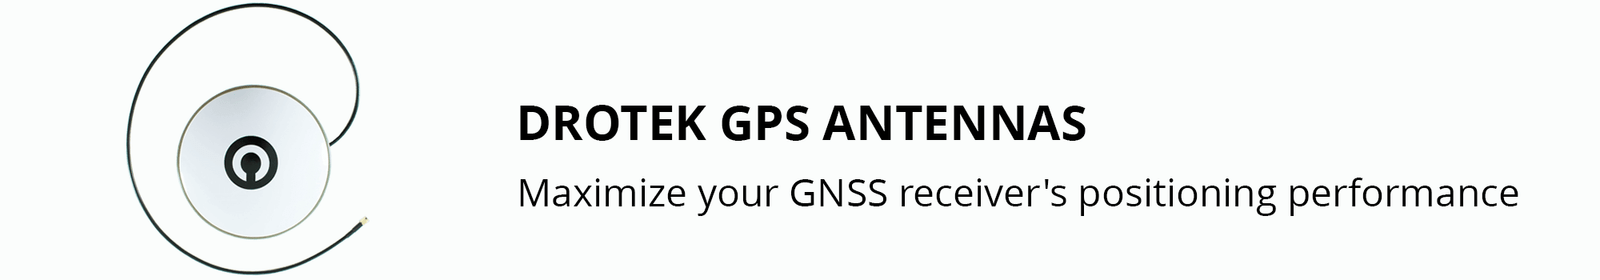 Discover our selection of multi-band gnss antennas covering the GPS L1 , L2 and L5, GLONASS G1/G2/G3, BeiDou B1/B2, Galileo E1/E5 plus L-band correction services coverage.